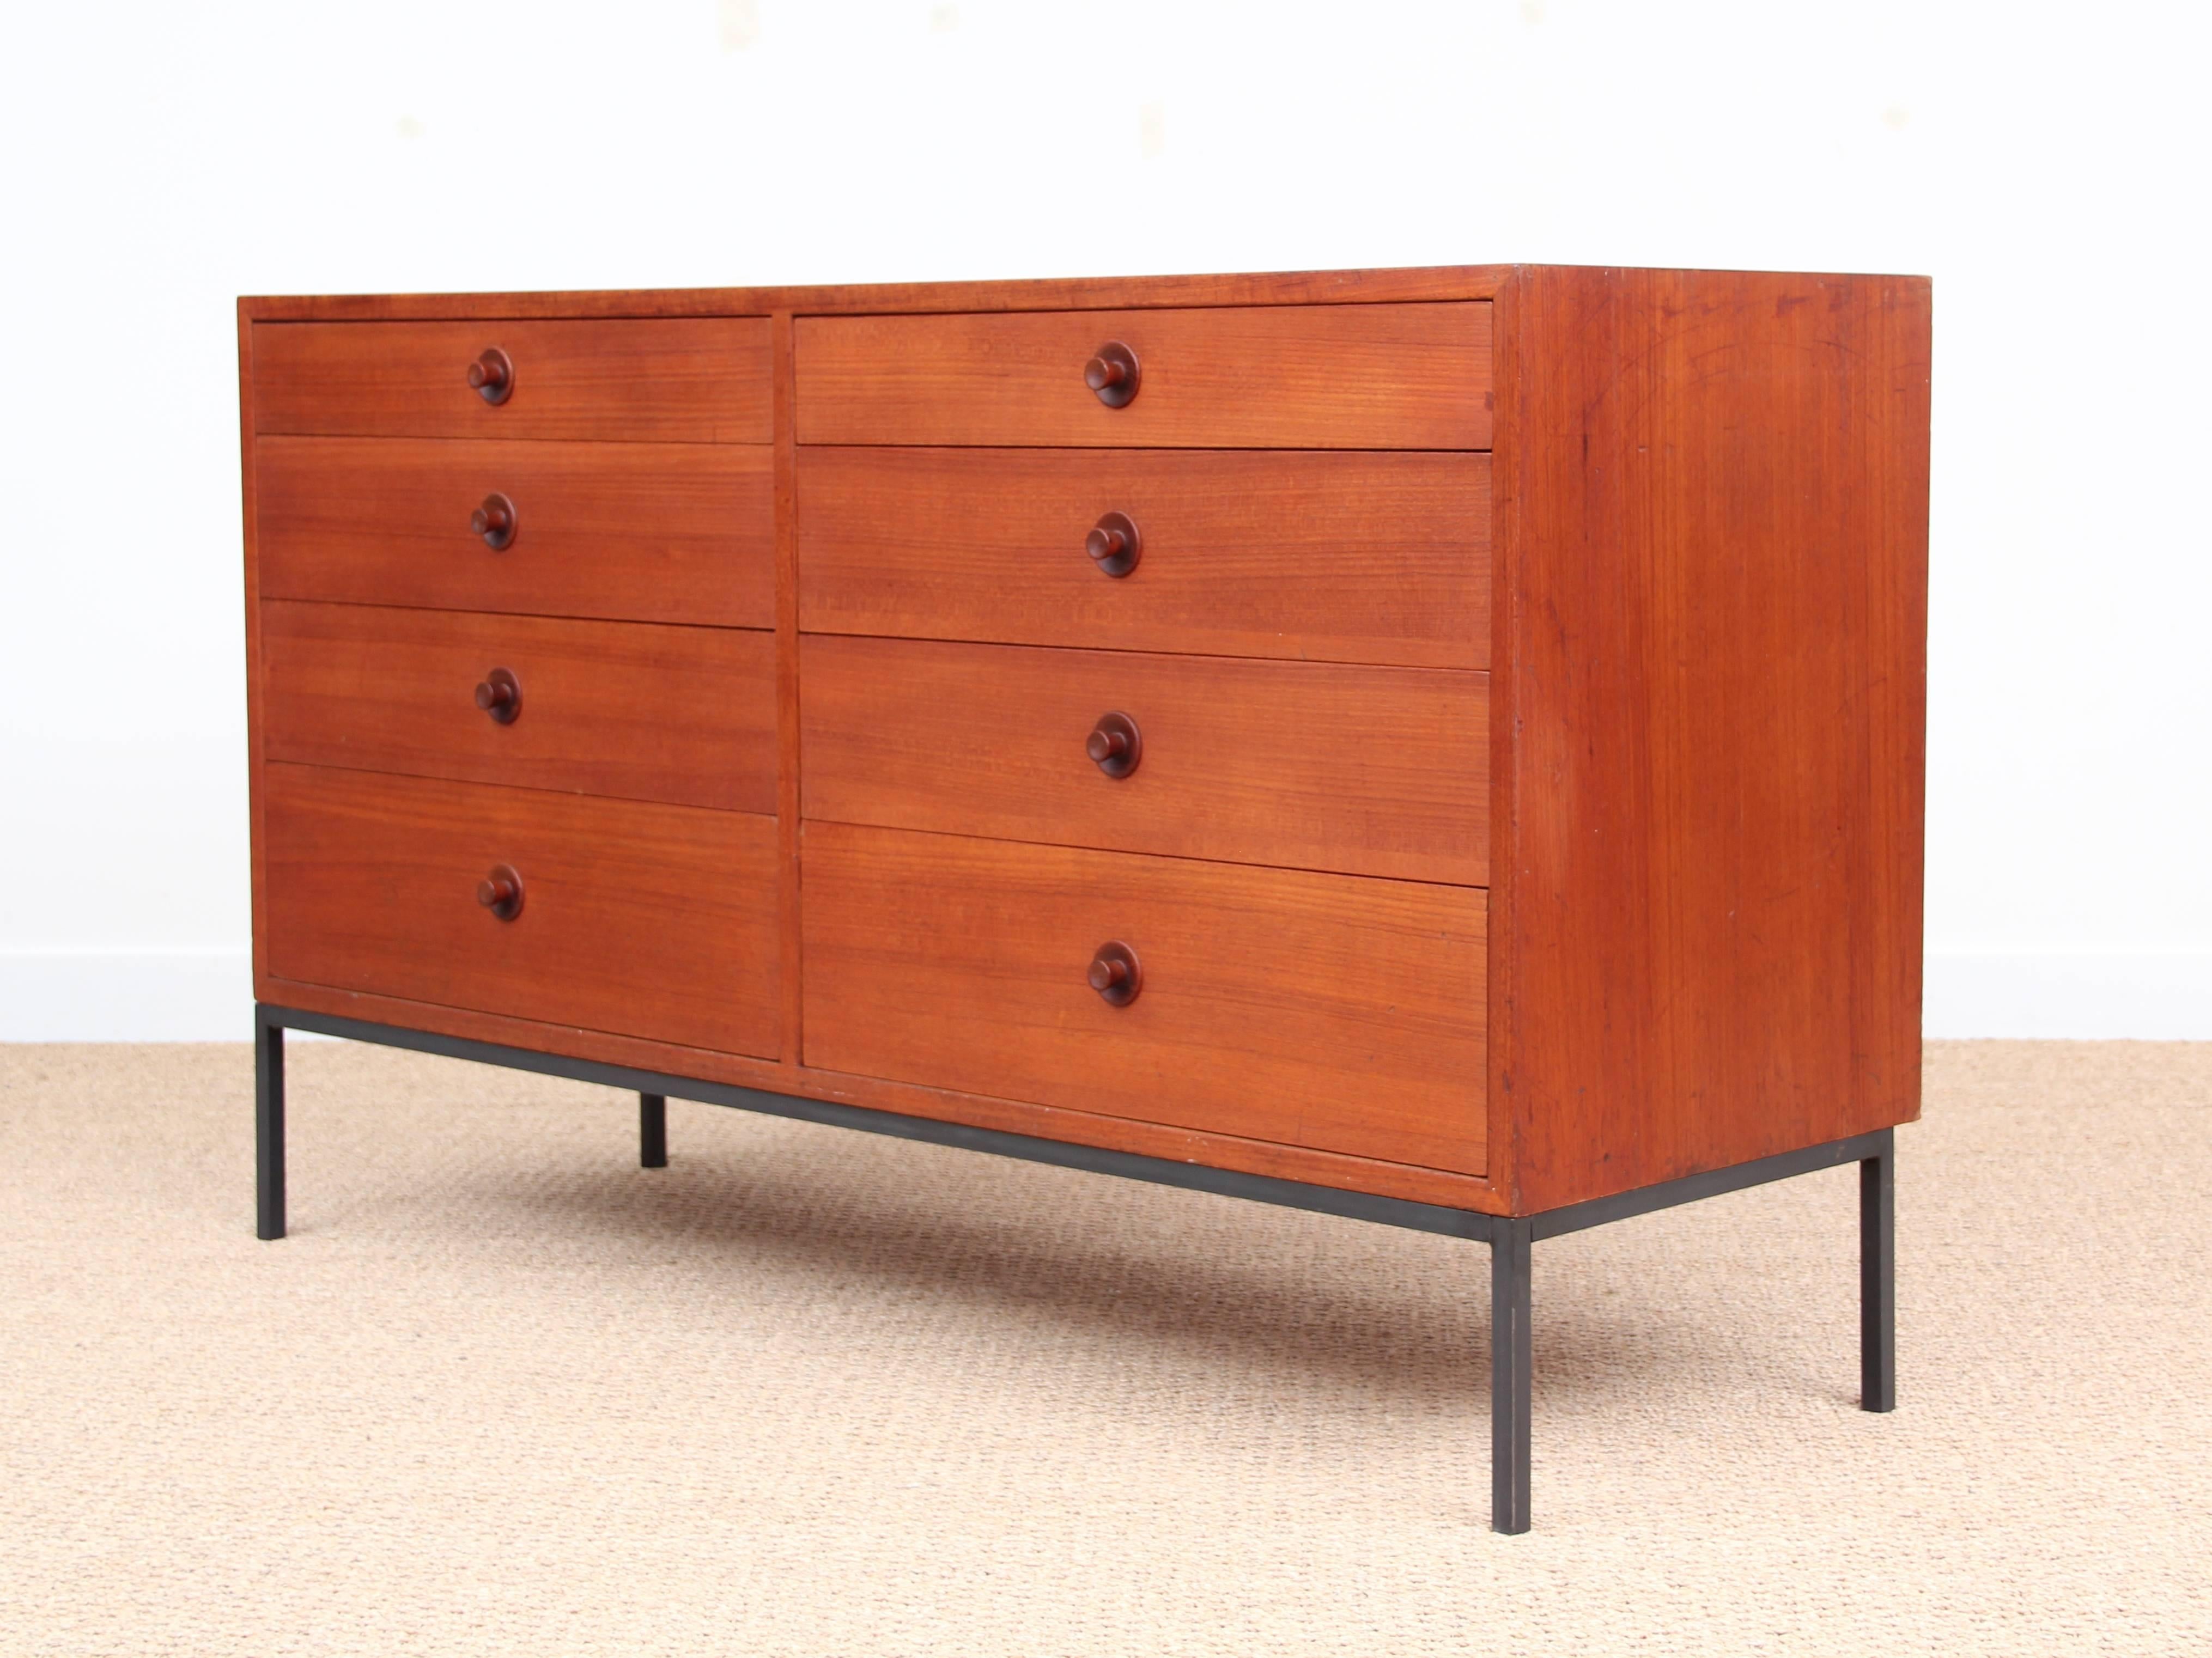 Mid-Century Modern double chest of drawers by Borge Mogensen for Karl Andersson & Söner. Eight drawers. Steel legs lately added.